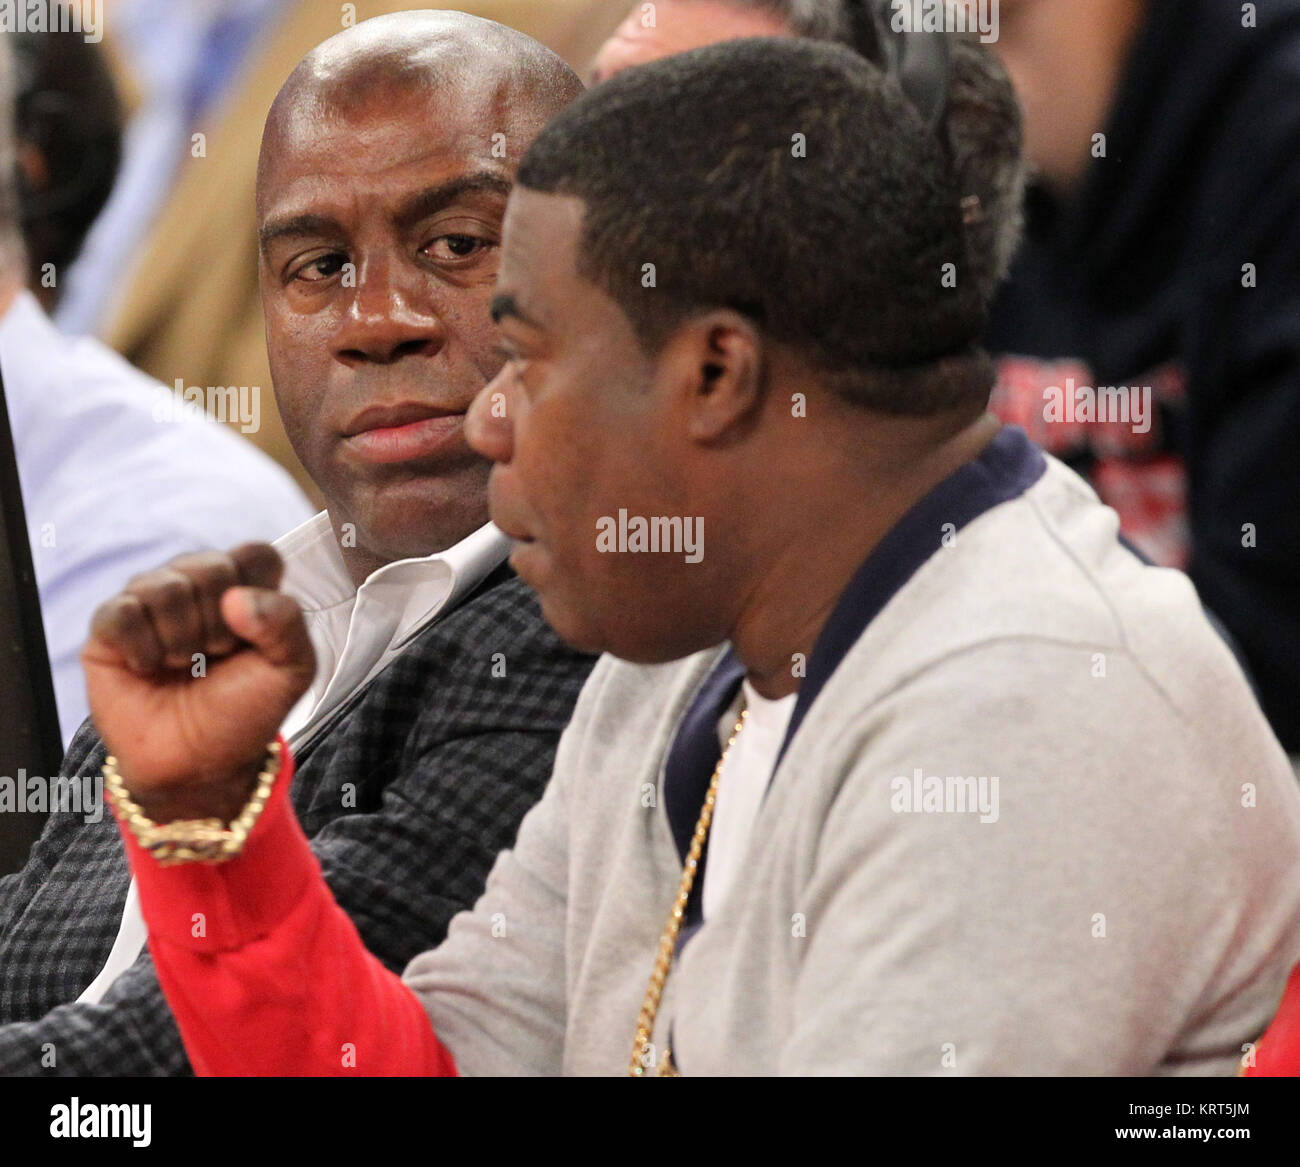 NEW YORK, NY - NOVEMBER 08: (Embargoed till November 10, 2015) Magic Johnson, Tracy Morgan with wife Megan Wollover sit with Michael K. Williams and  Director Spike Lee at the New York Knicks vs Los Angeles Lakers game at Madison Square Garden on November 8, 2015 in New York City.   People:  Magic Johnson, Tracy Morgan Stock Photo